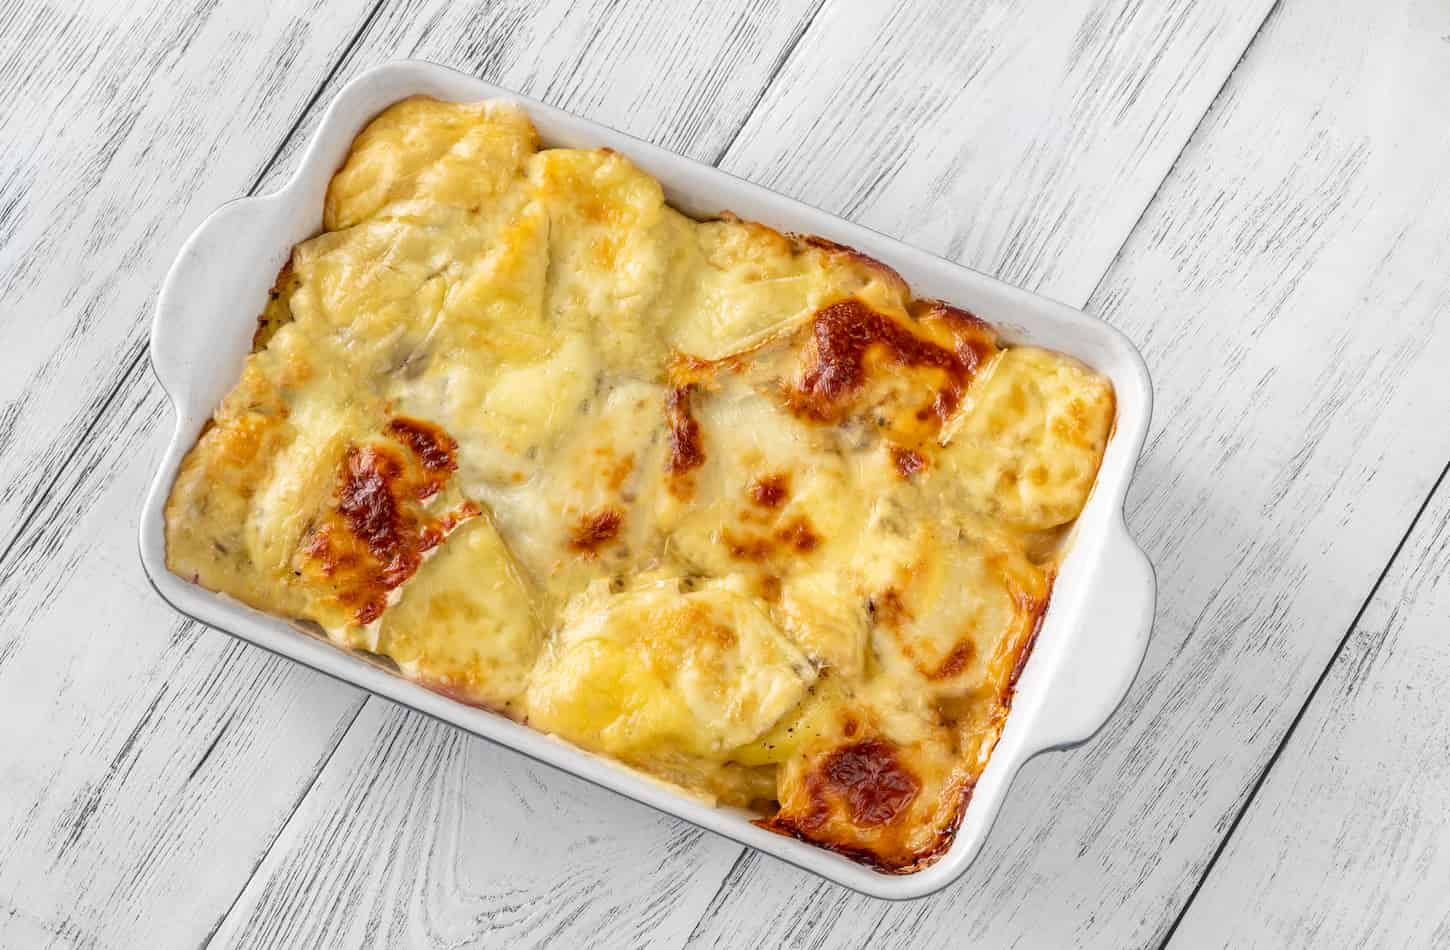 An image of Tartiflette - a French casserole dish made with potatoes, reblochon cheese, lardons, and onions.